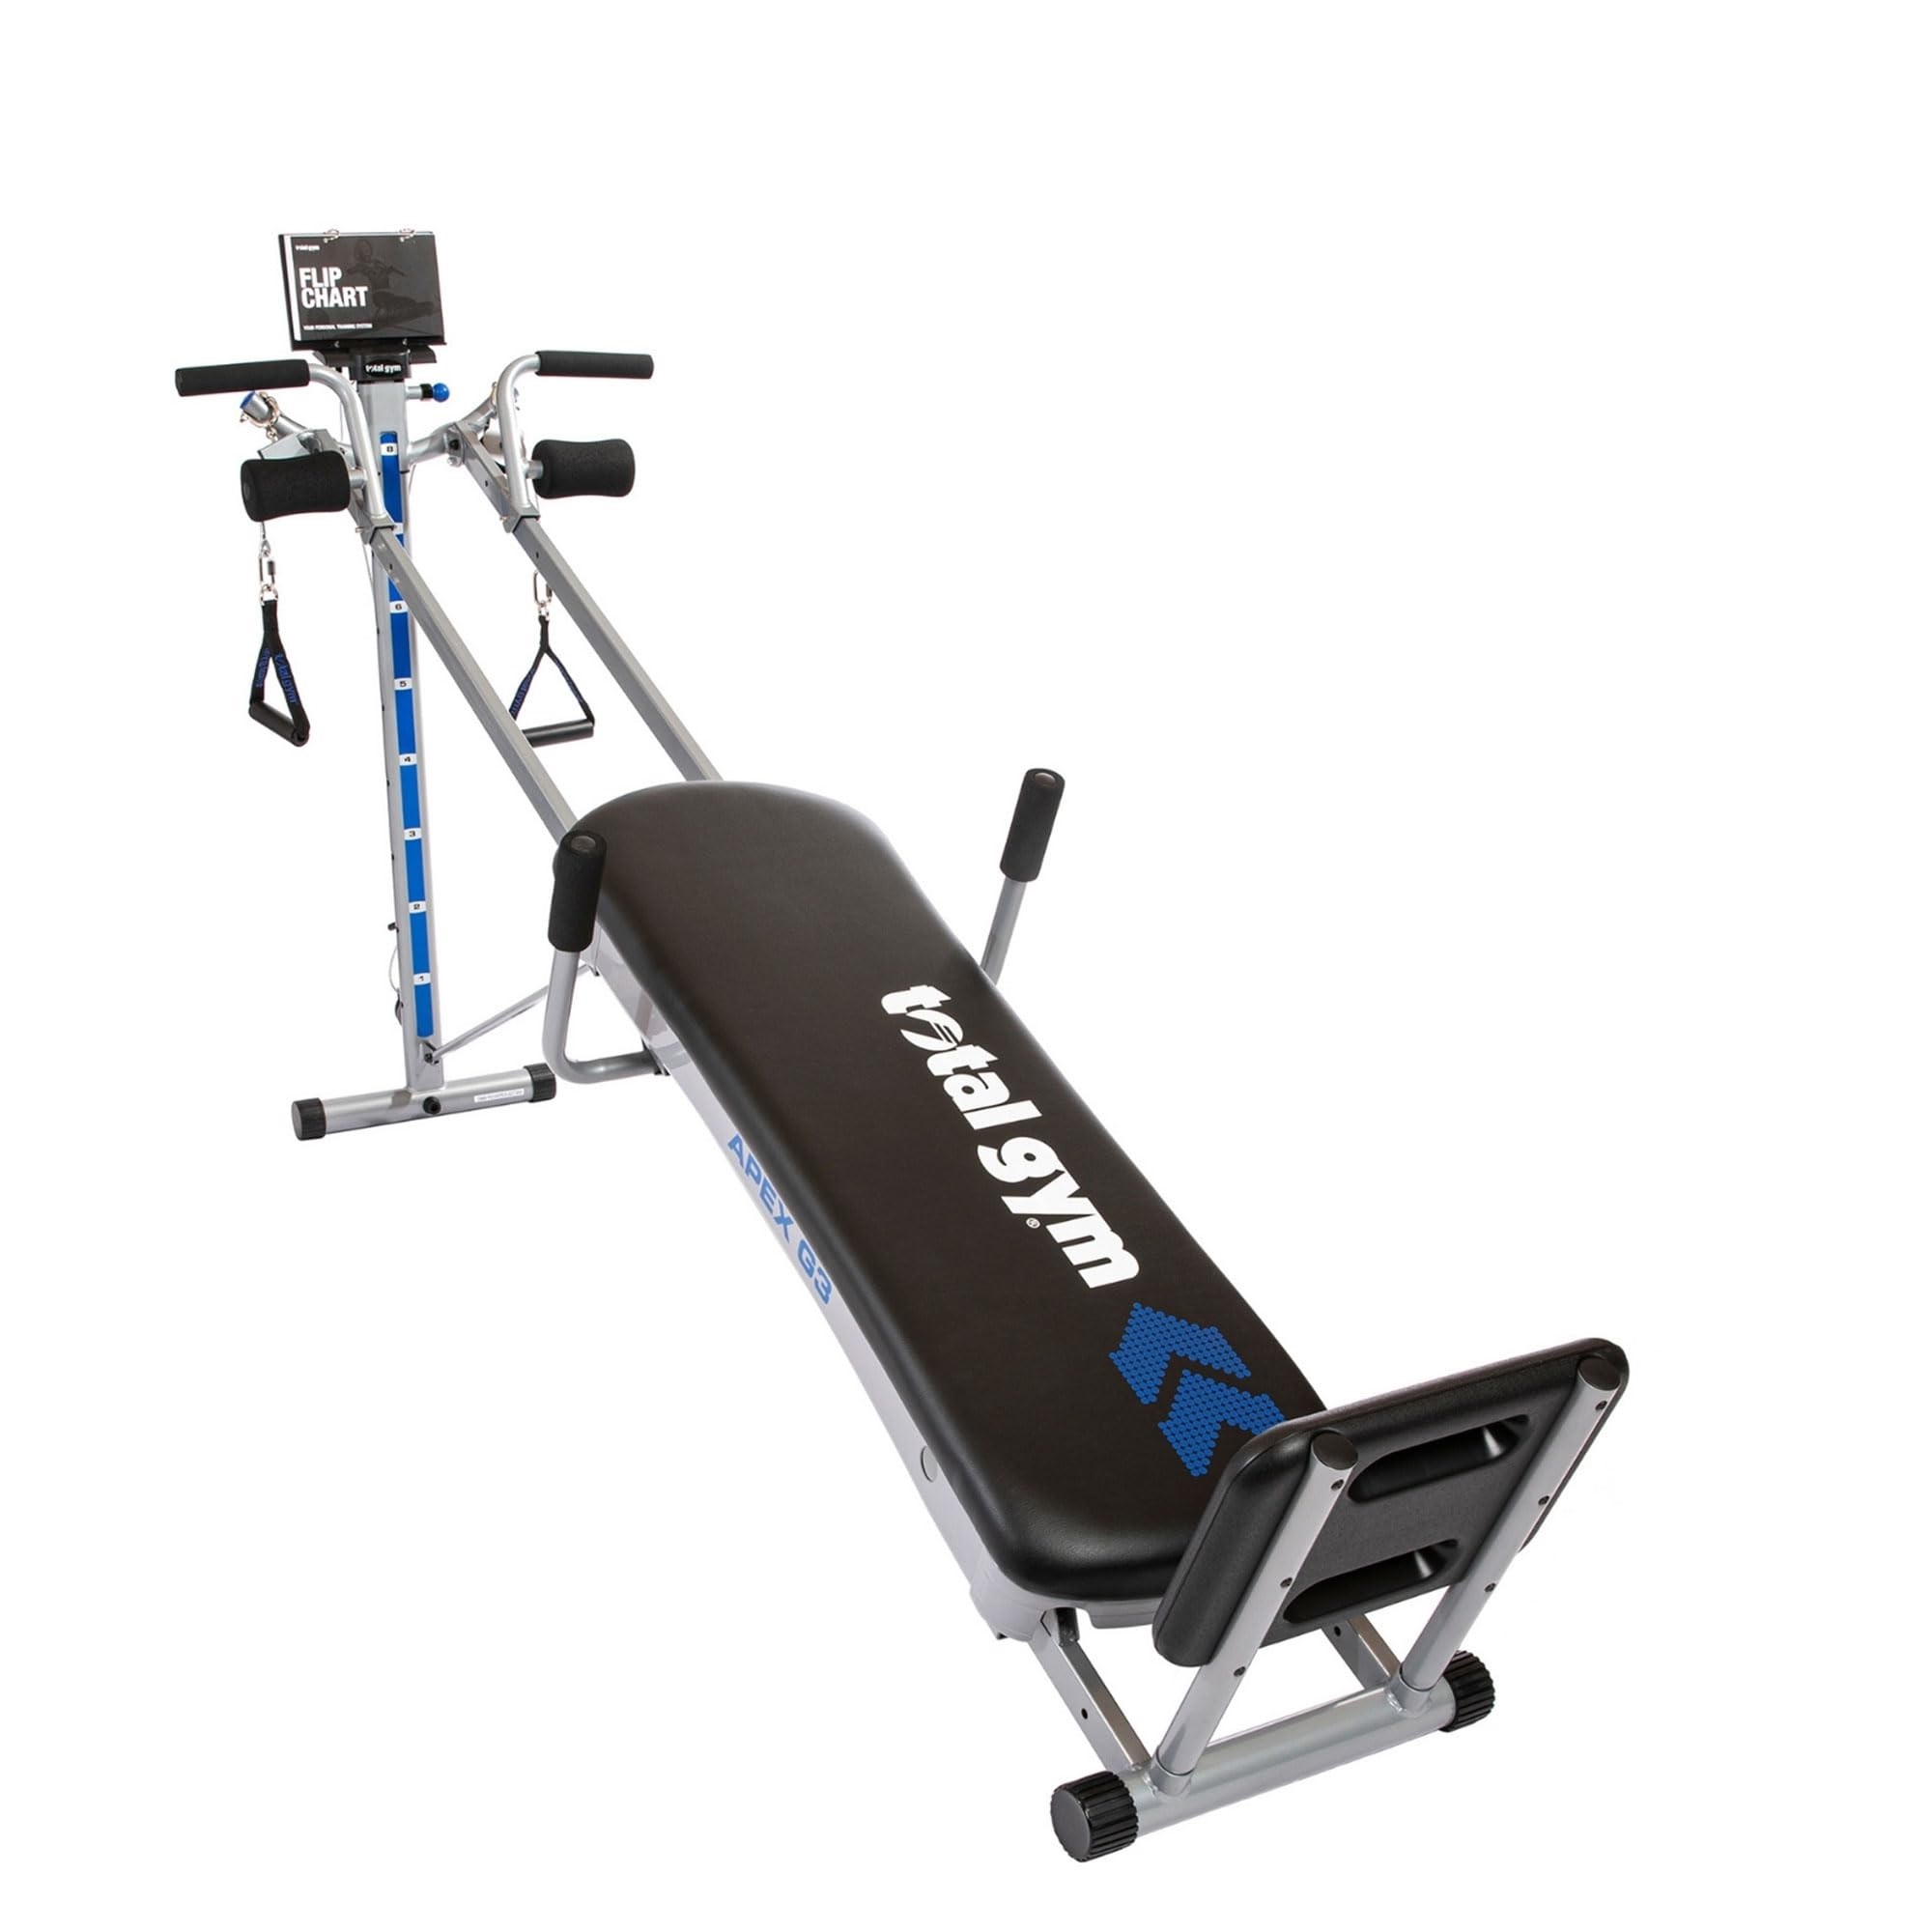 Total Gym APEX G3 Fitness Incline Weight Trainer with 8 Resistance Levels - image 1 of 11